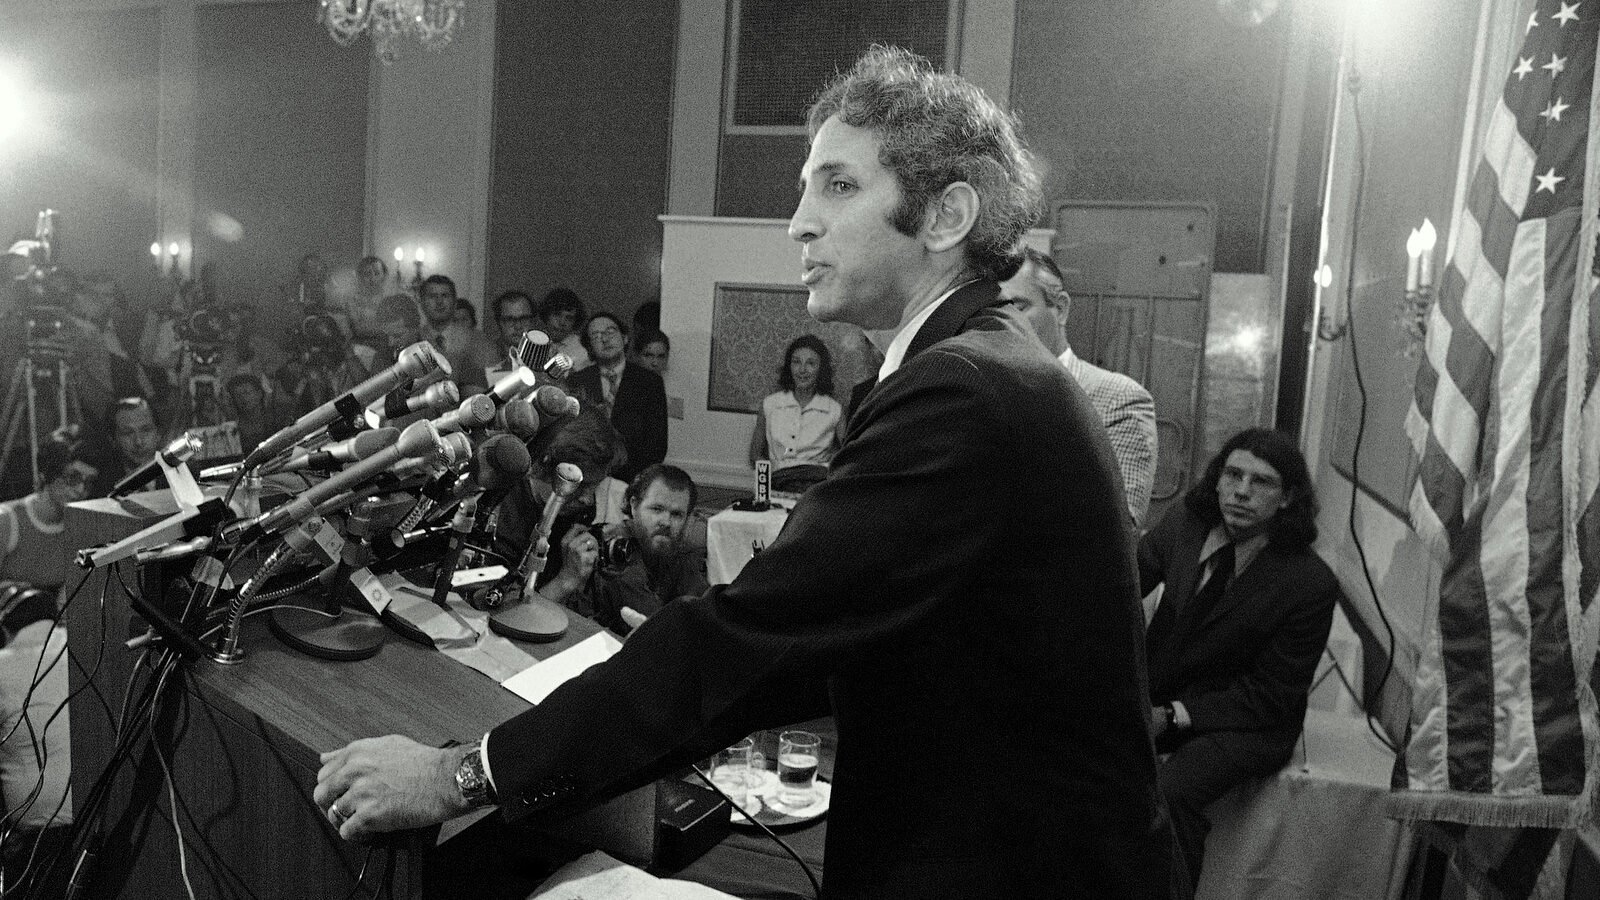 Dr. Daniel Ellsberg faces a battery of microphones at a news conference in Cambridge on Thursday, July 1, 1971. Ellsberg charged that government secrecy has led to the deaths of 50,000 Americans in Vietnam. (AP Photo)